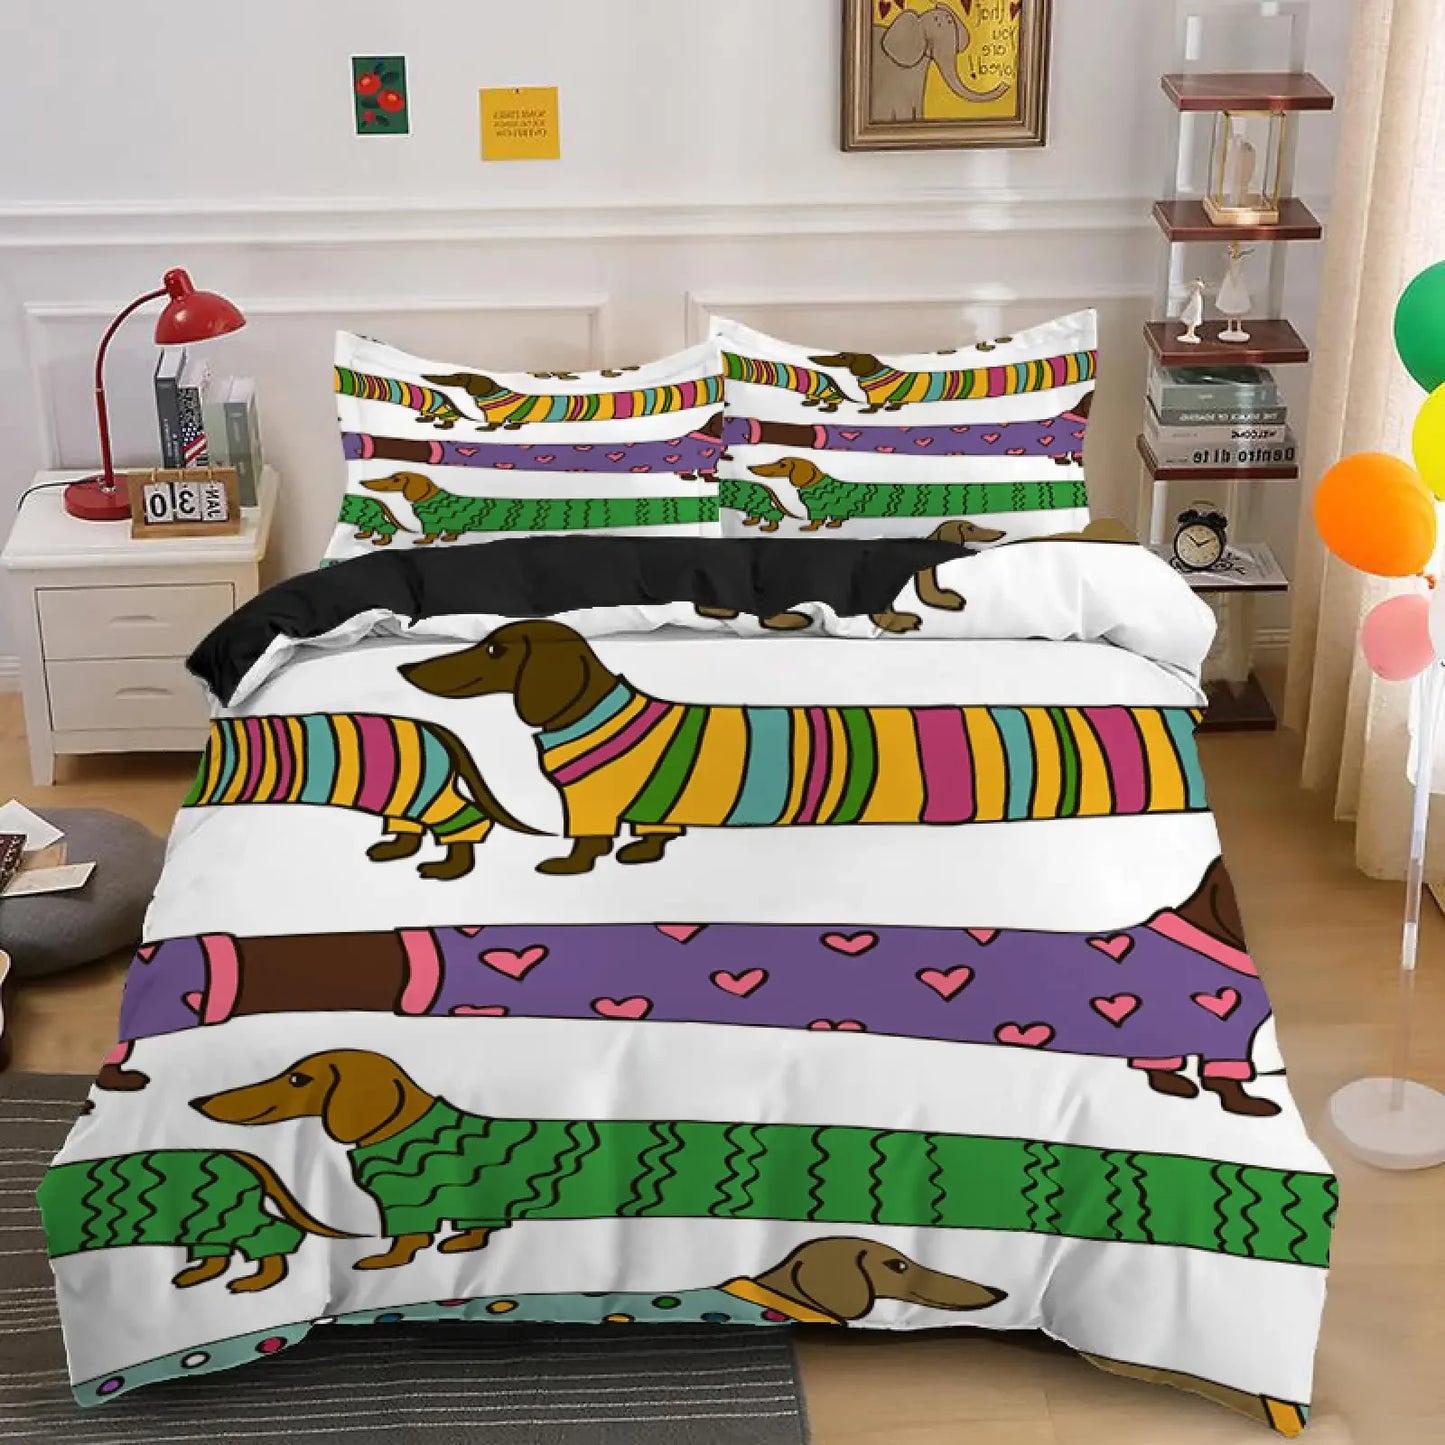 Dachshund Duvet Cover Set Cartoon Style Dachshunds King Size Bedding Set for Dog Lovers Kids Teens 2/3pcs Twin Comforter Cover